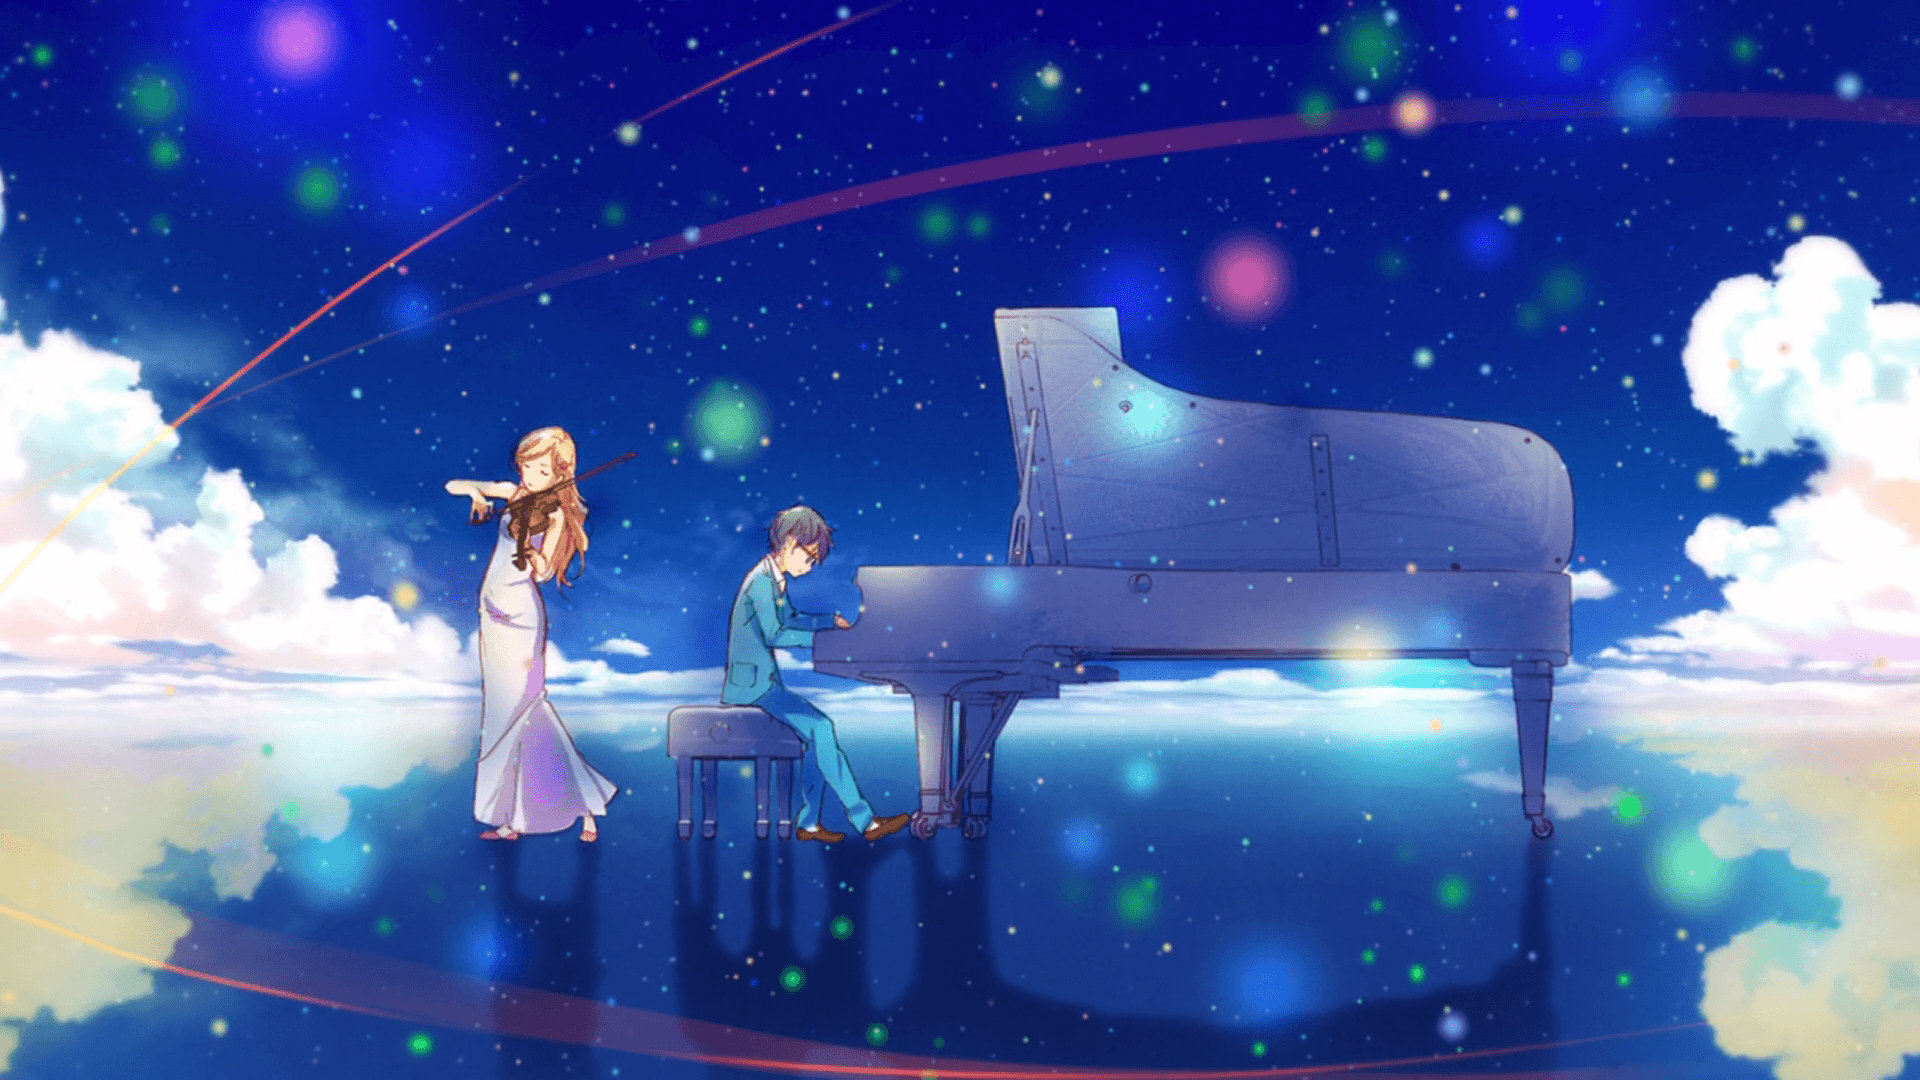 Your Lie In April Tumblr Wallpapers